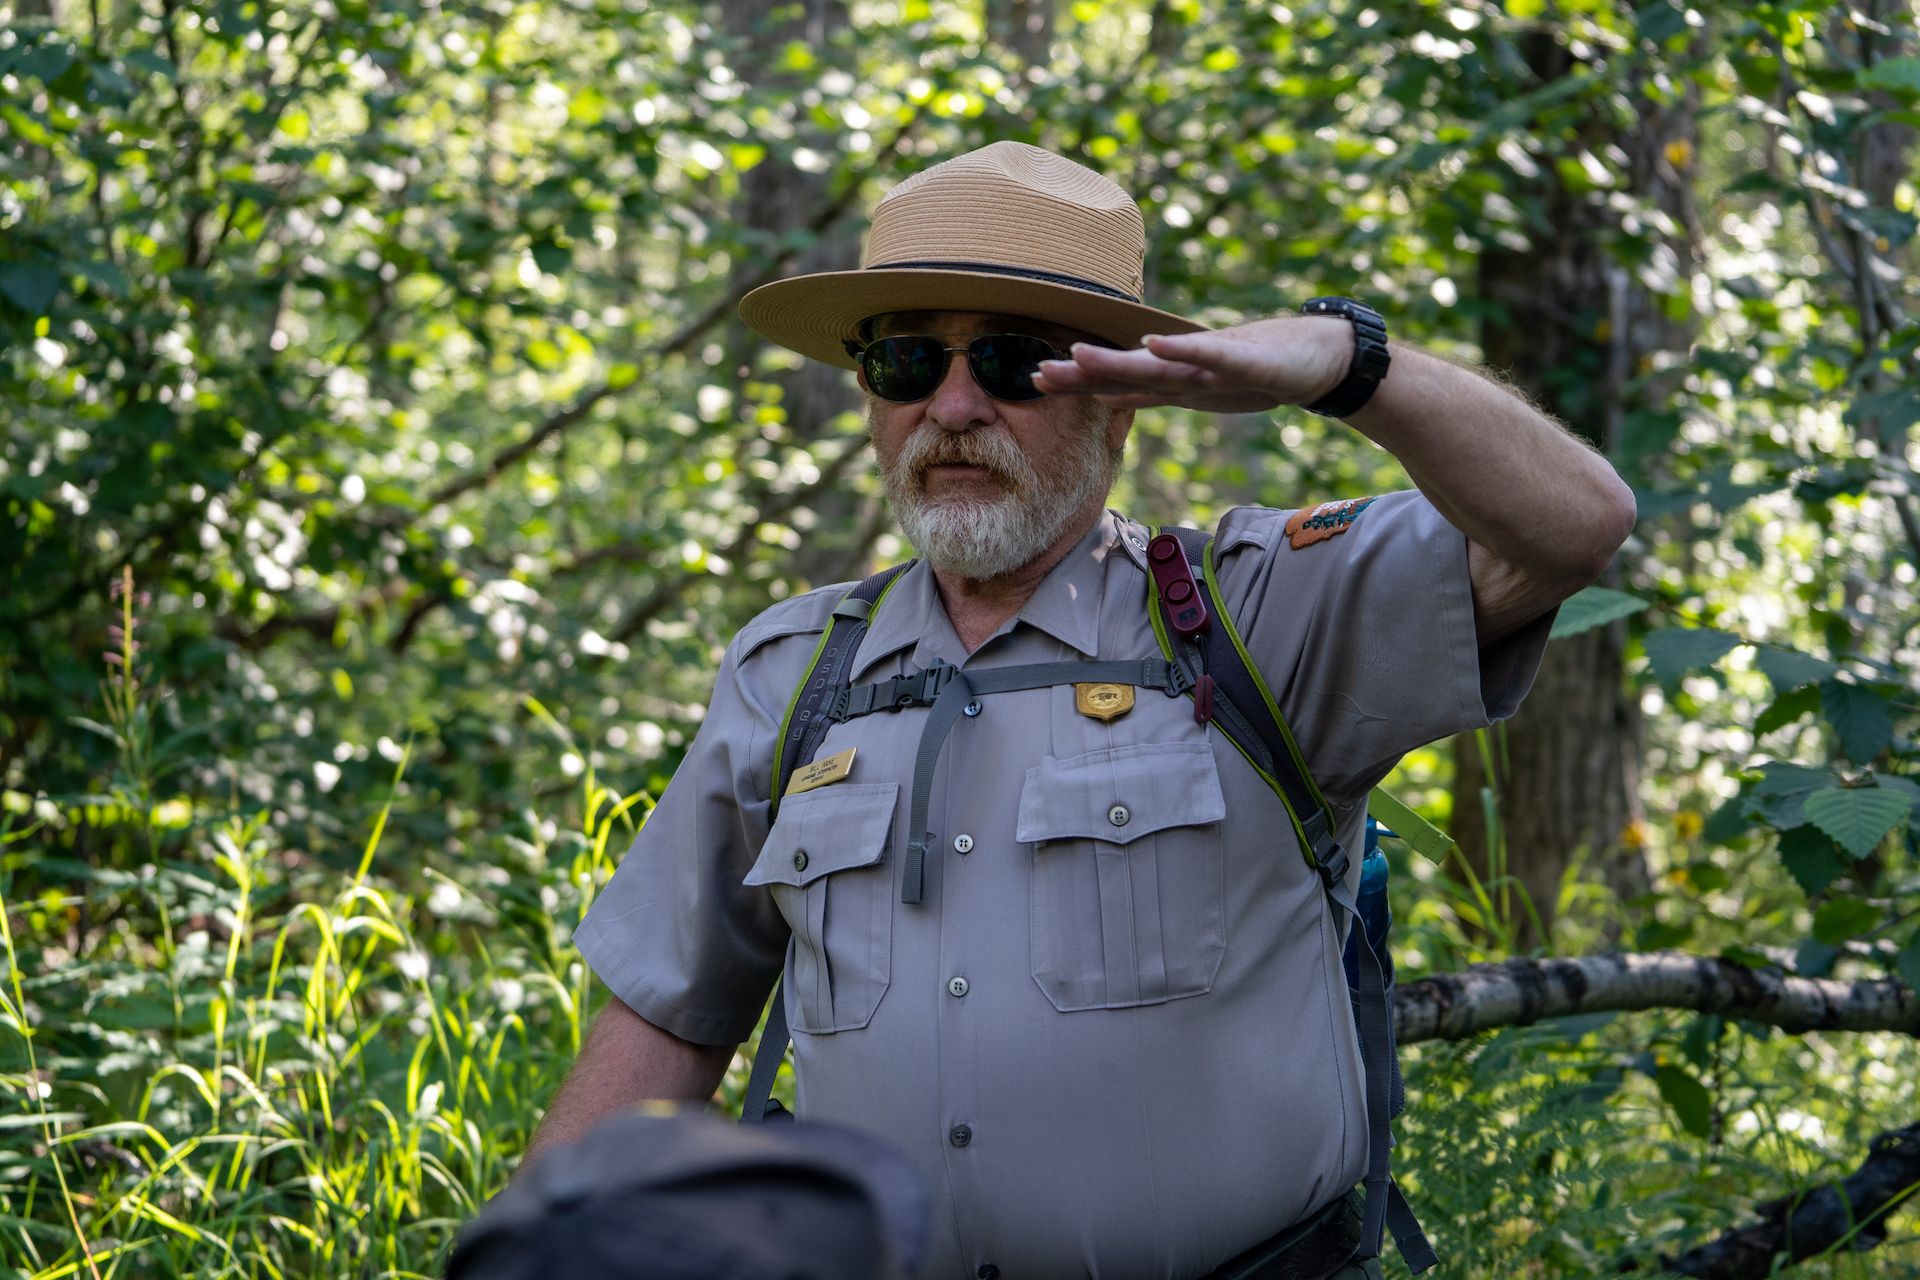 Ranger Bill sharing his knowledge about the park